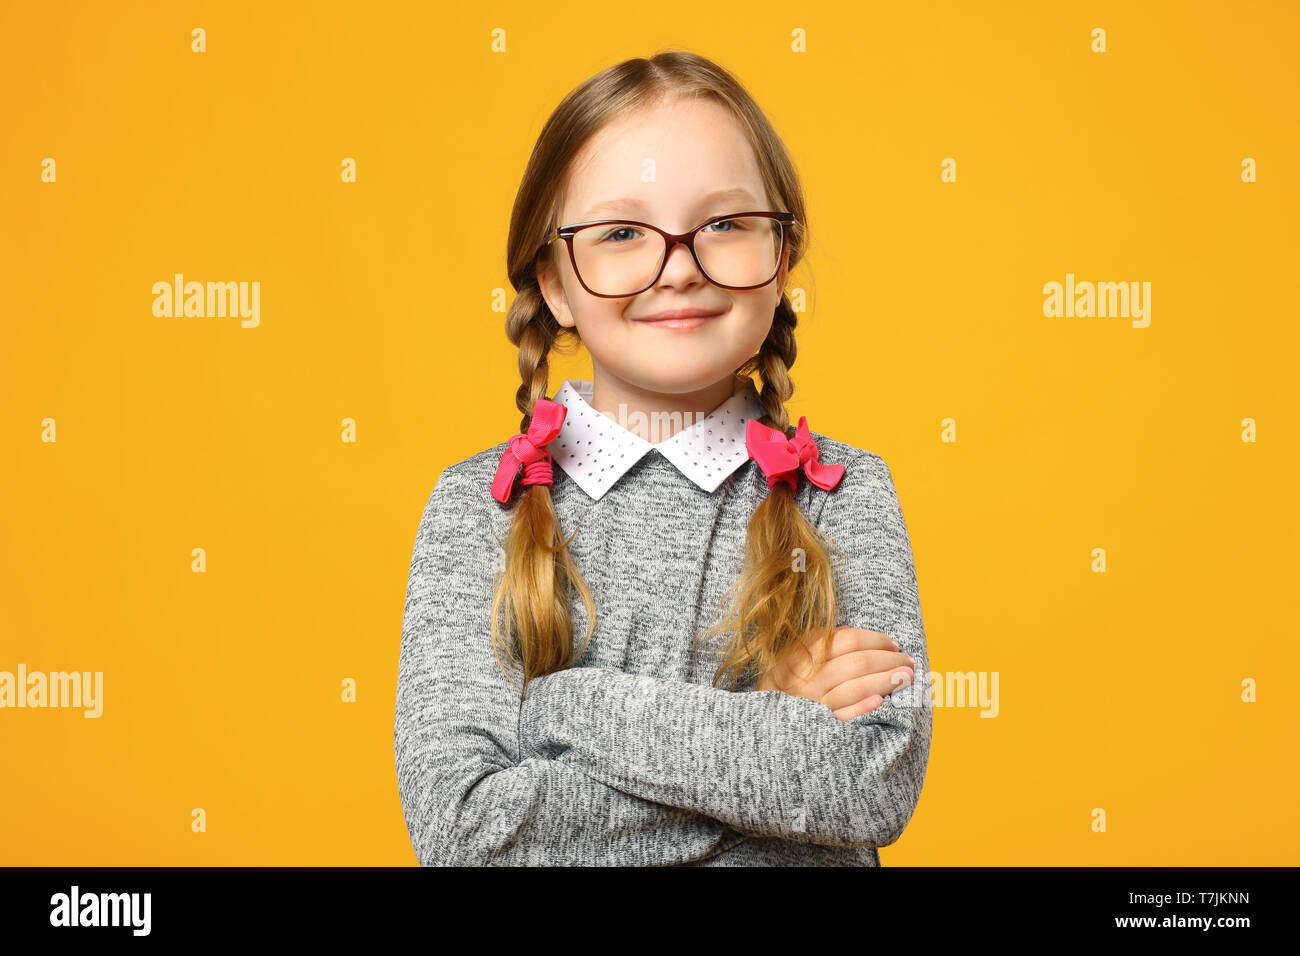 Closeup portrait of a funny little girl in glasses on a yellow background. Child schoolgirl folded her arms and looks into the camera. Stock Photo